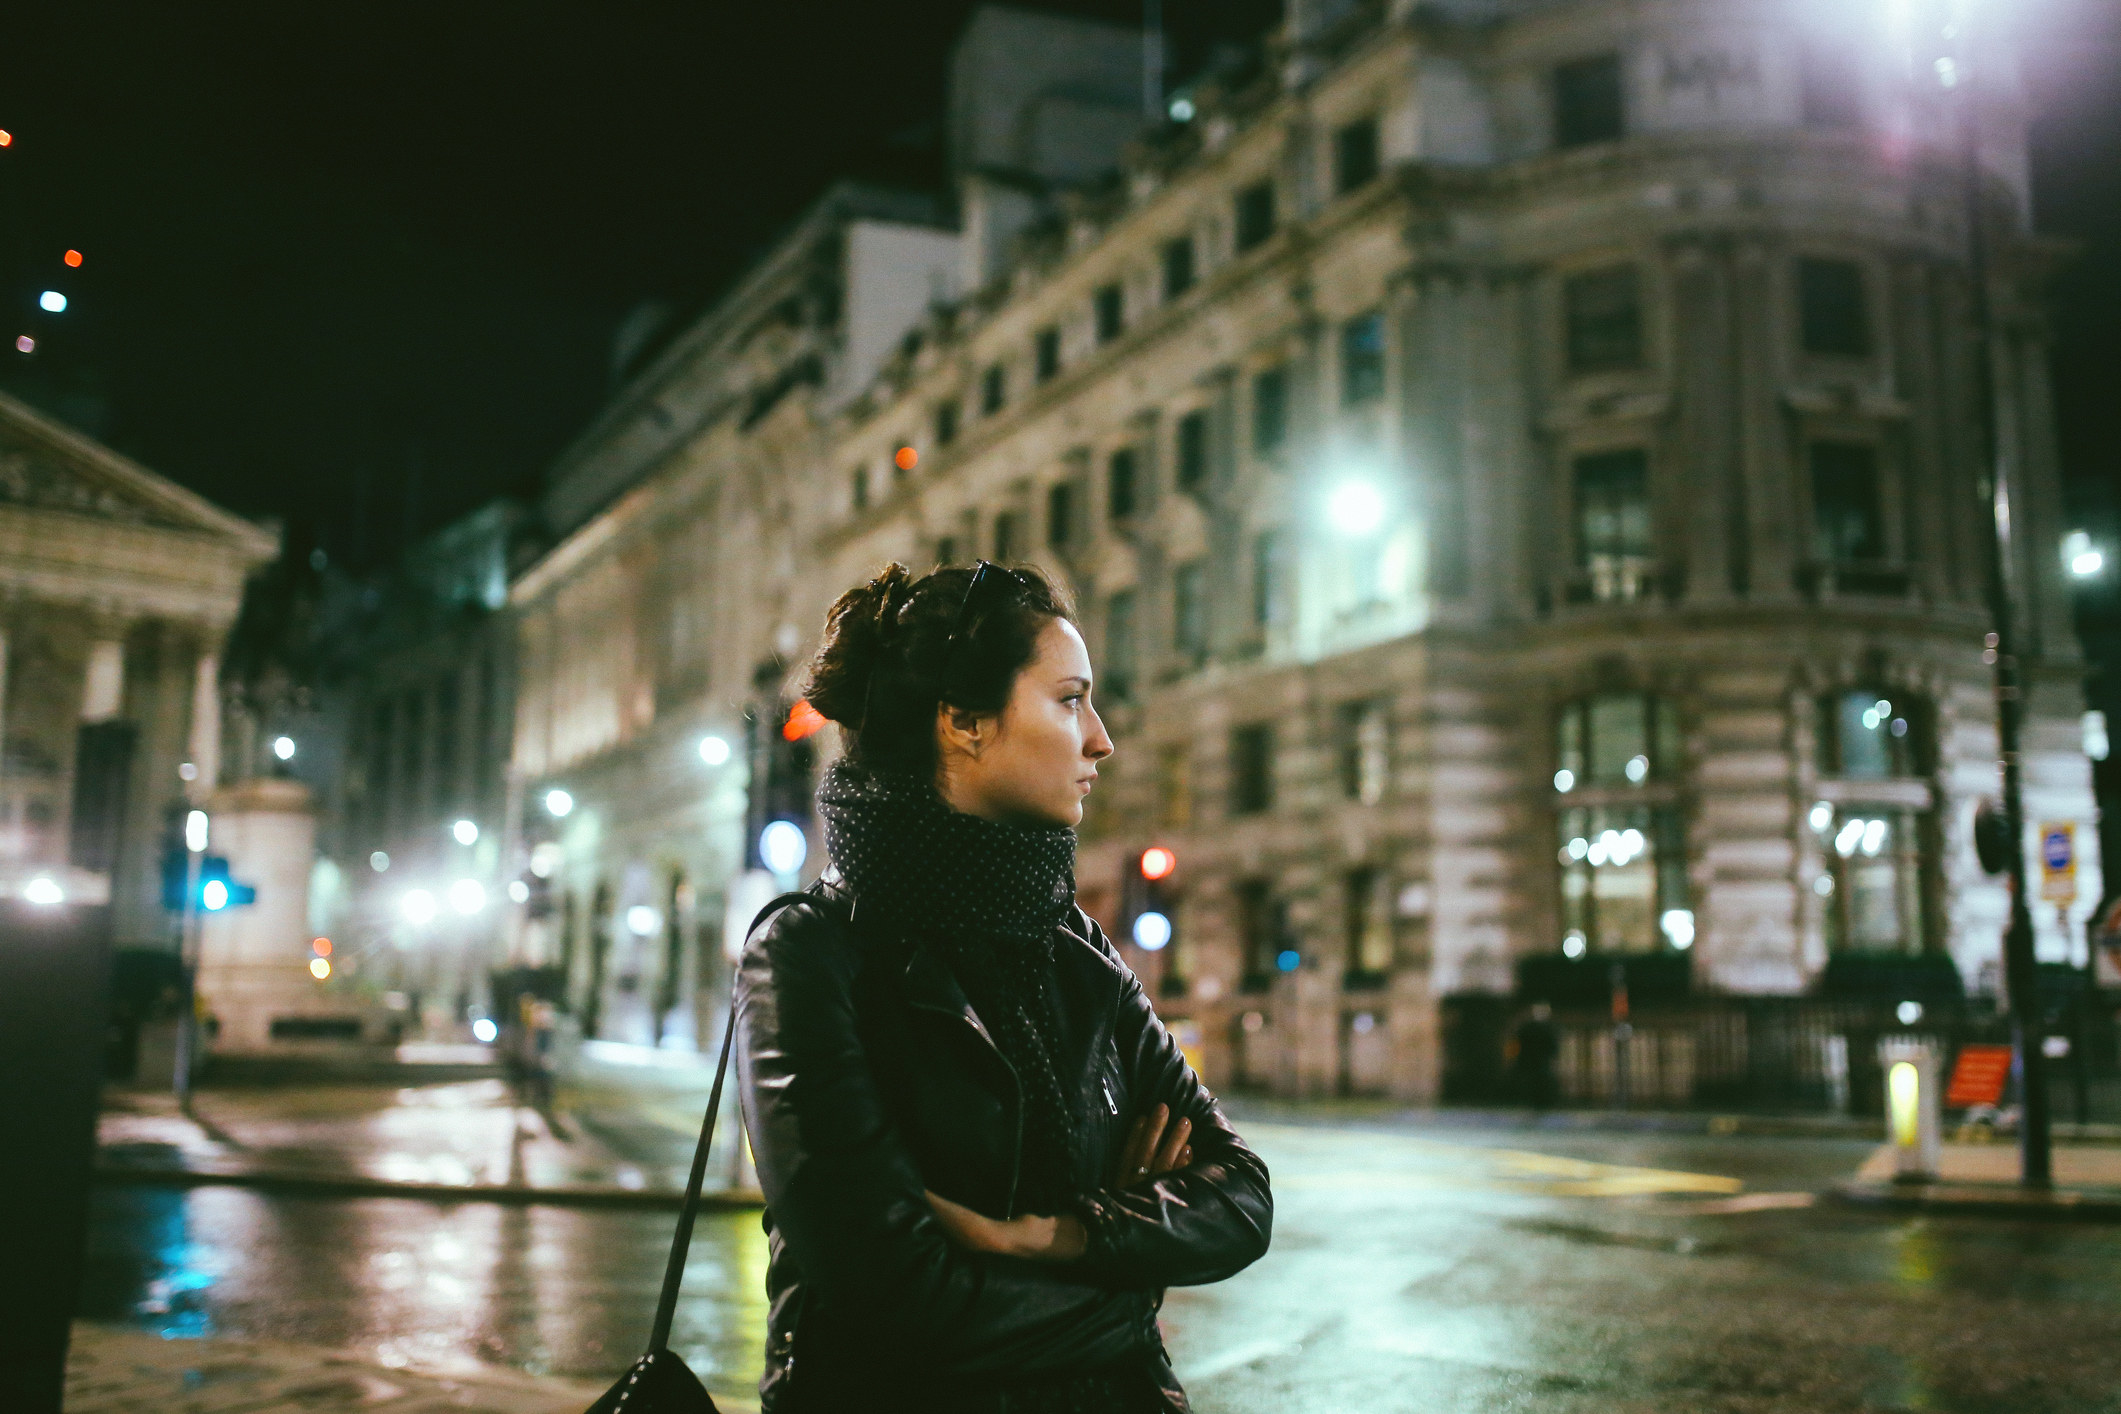 A woman waiting on a street alone at night